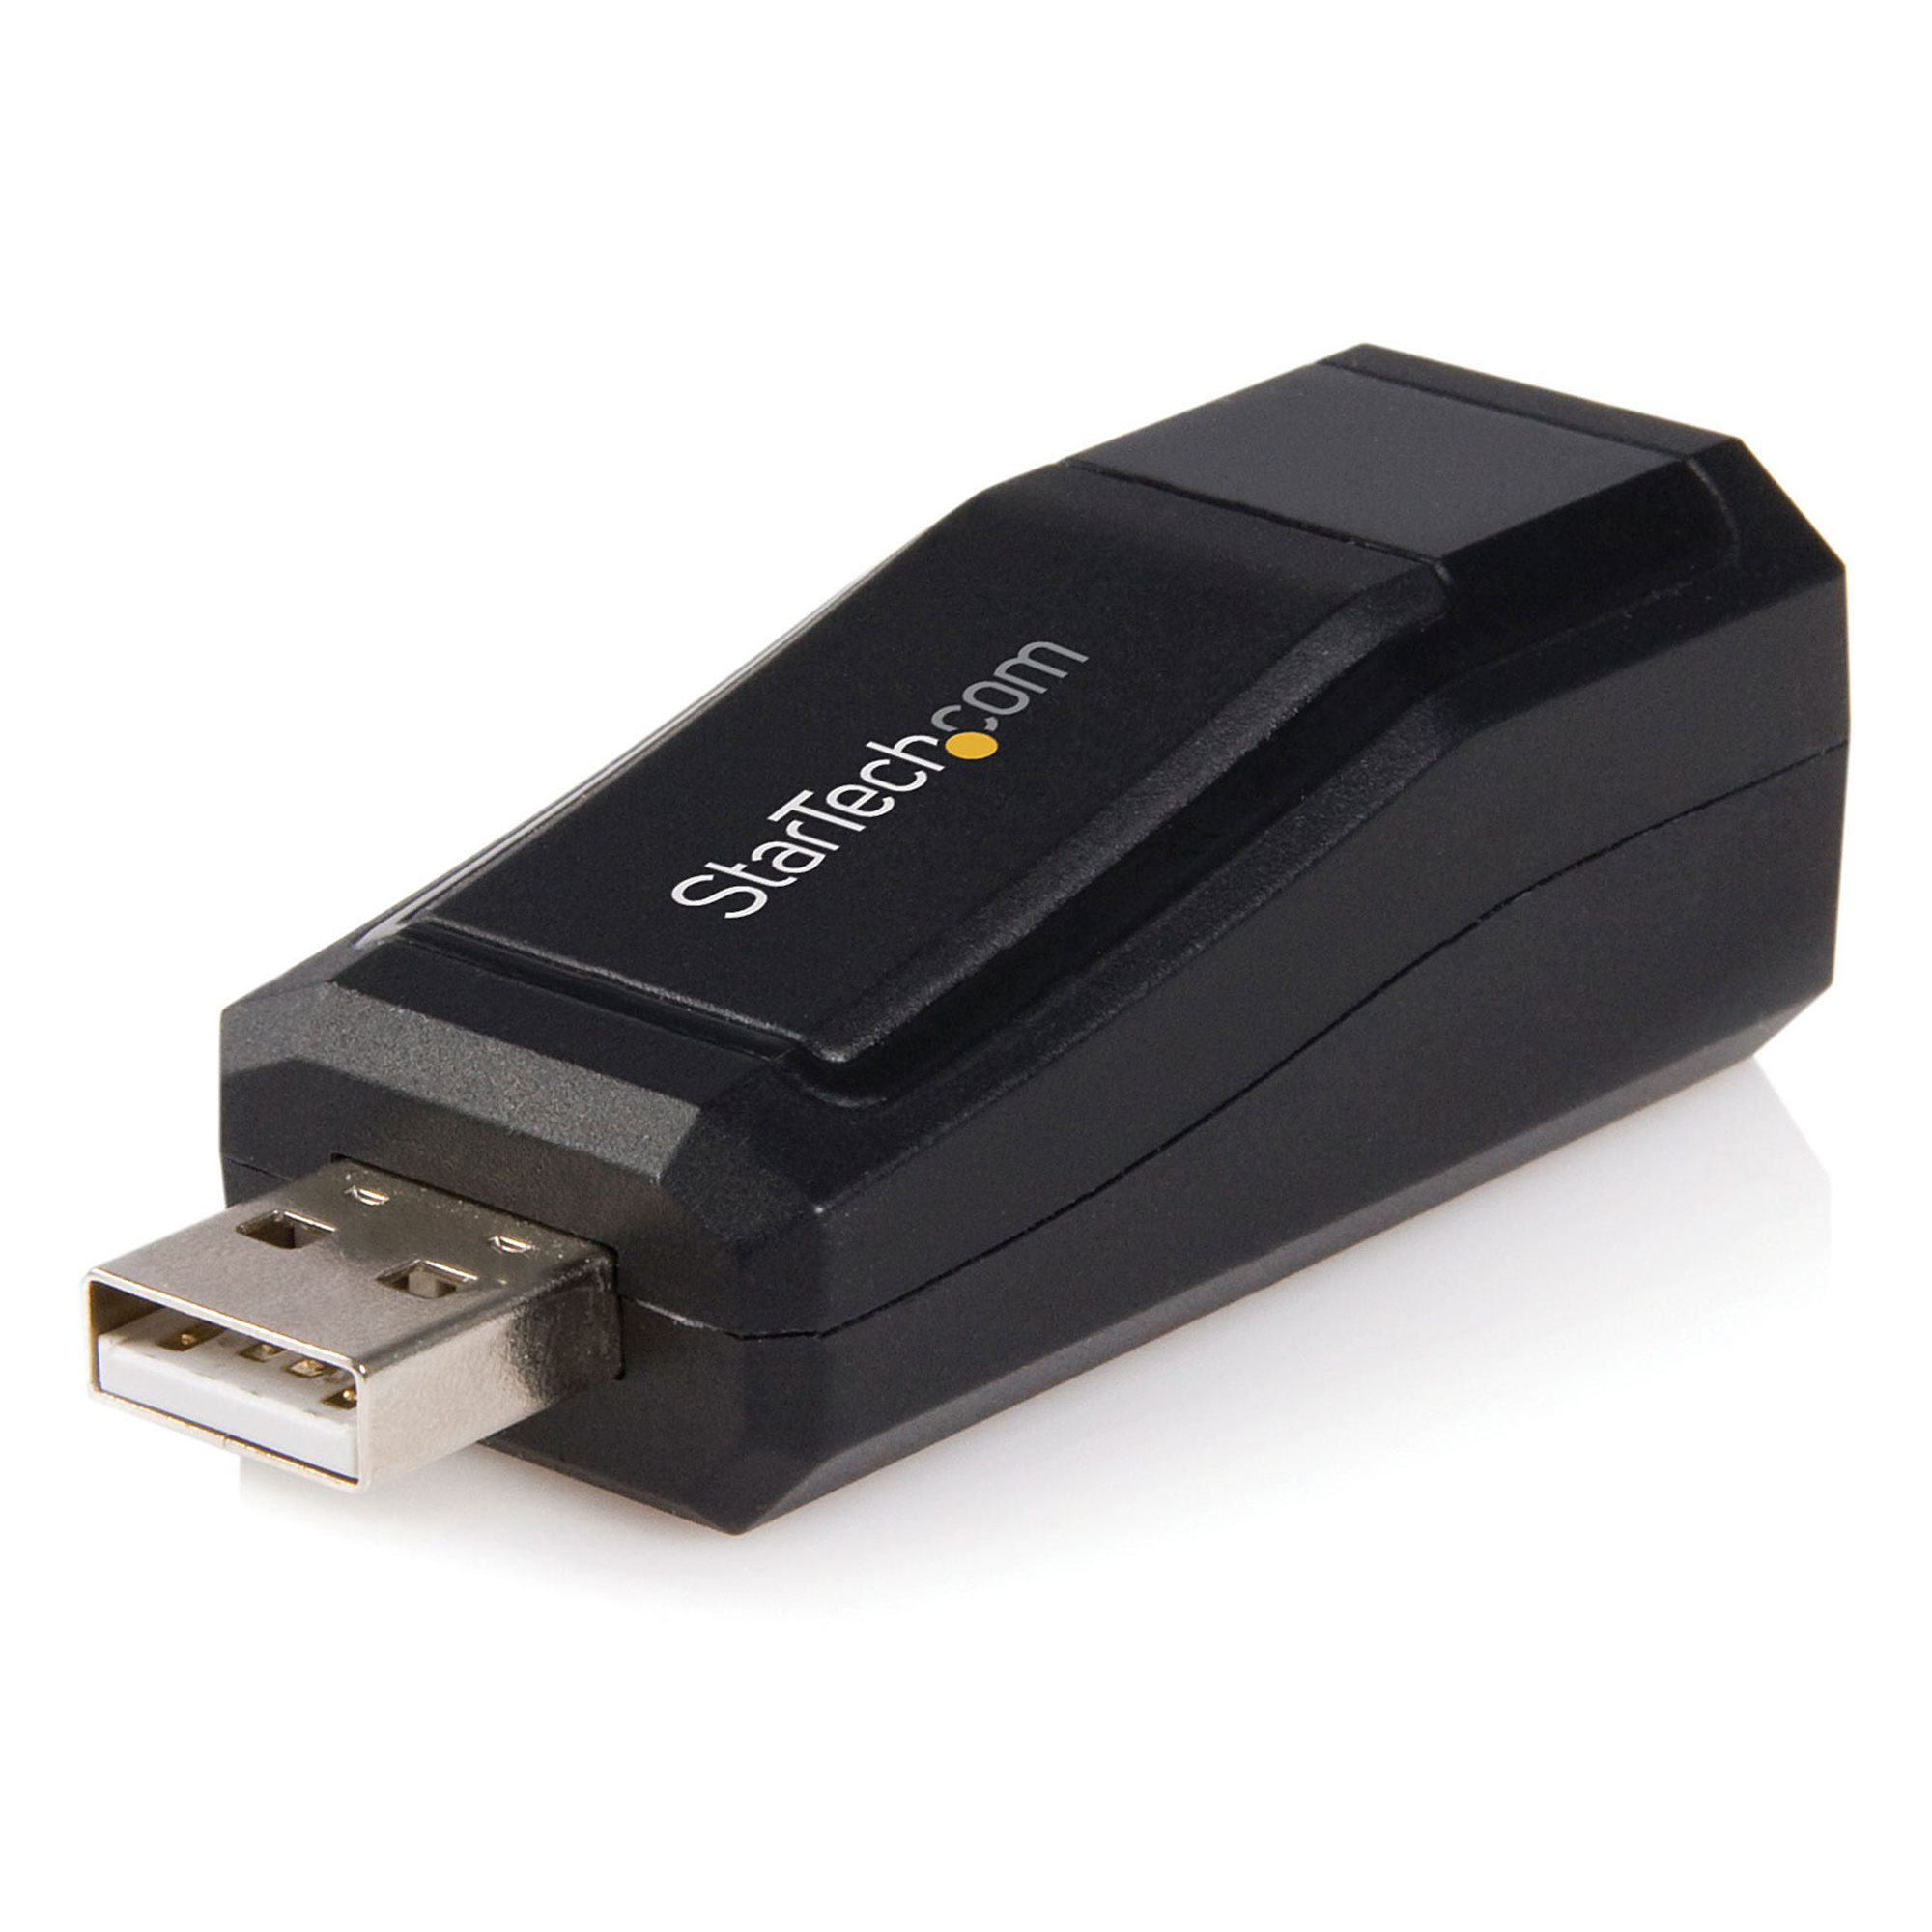 USB to Ethernet Network Adapter - USB and Thunderbolt Network Adapters |  